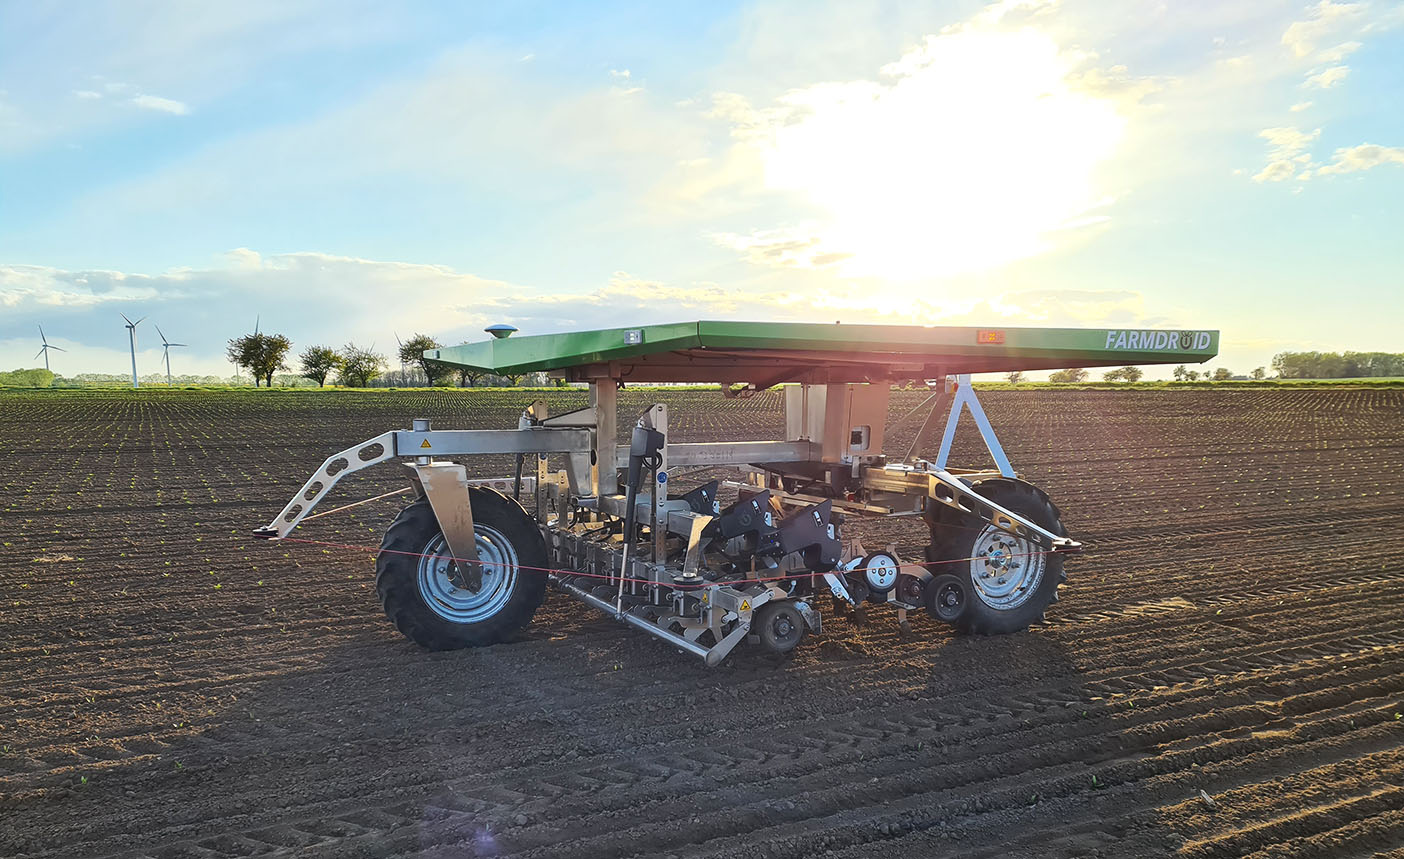 06.Farmdroid suggests that its robots could work unsupervised for the season with the aid of a geofence, offering a viable alternative to spraying for non-organic sugar beet